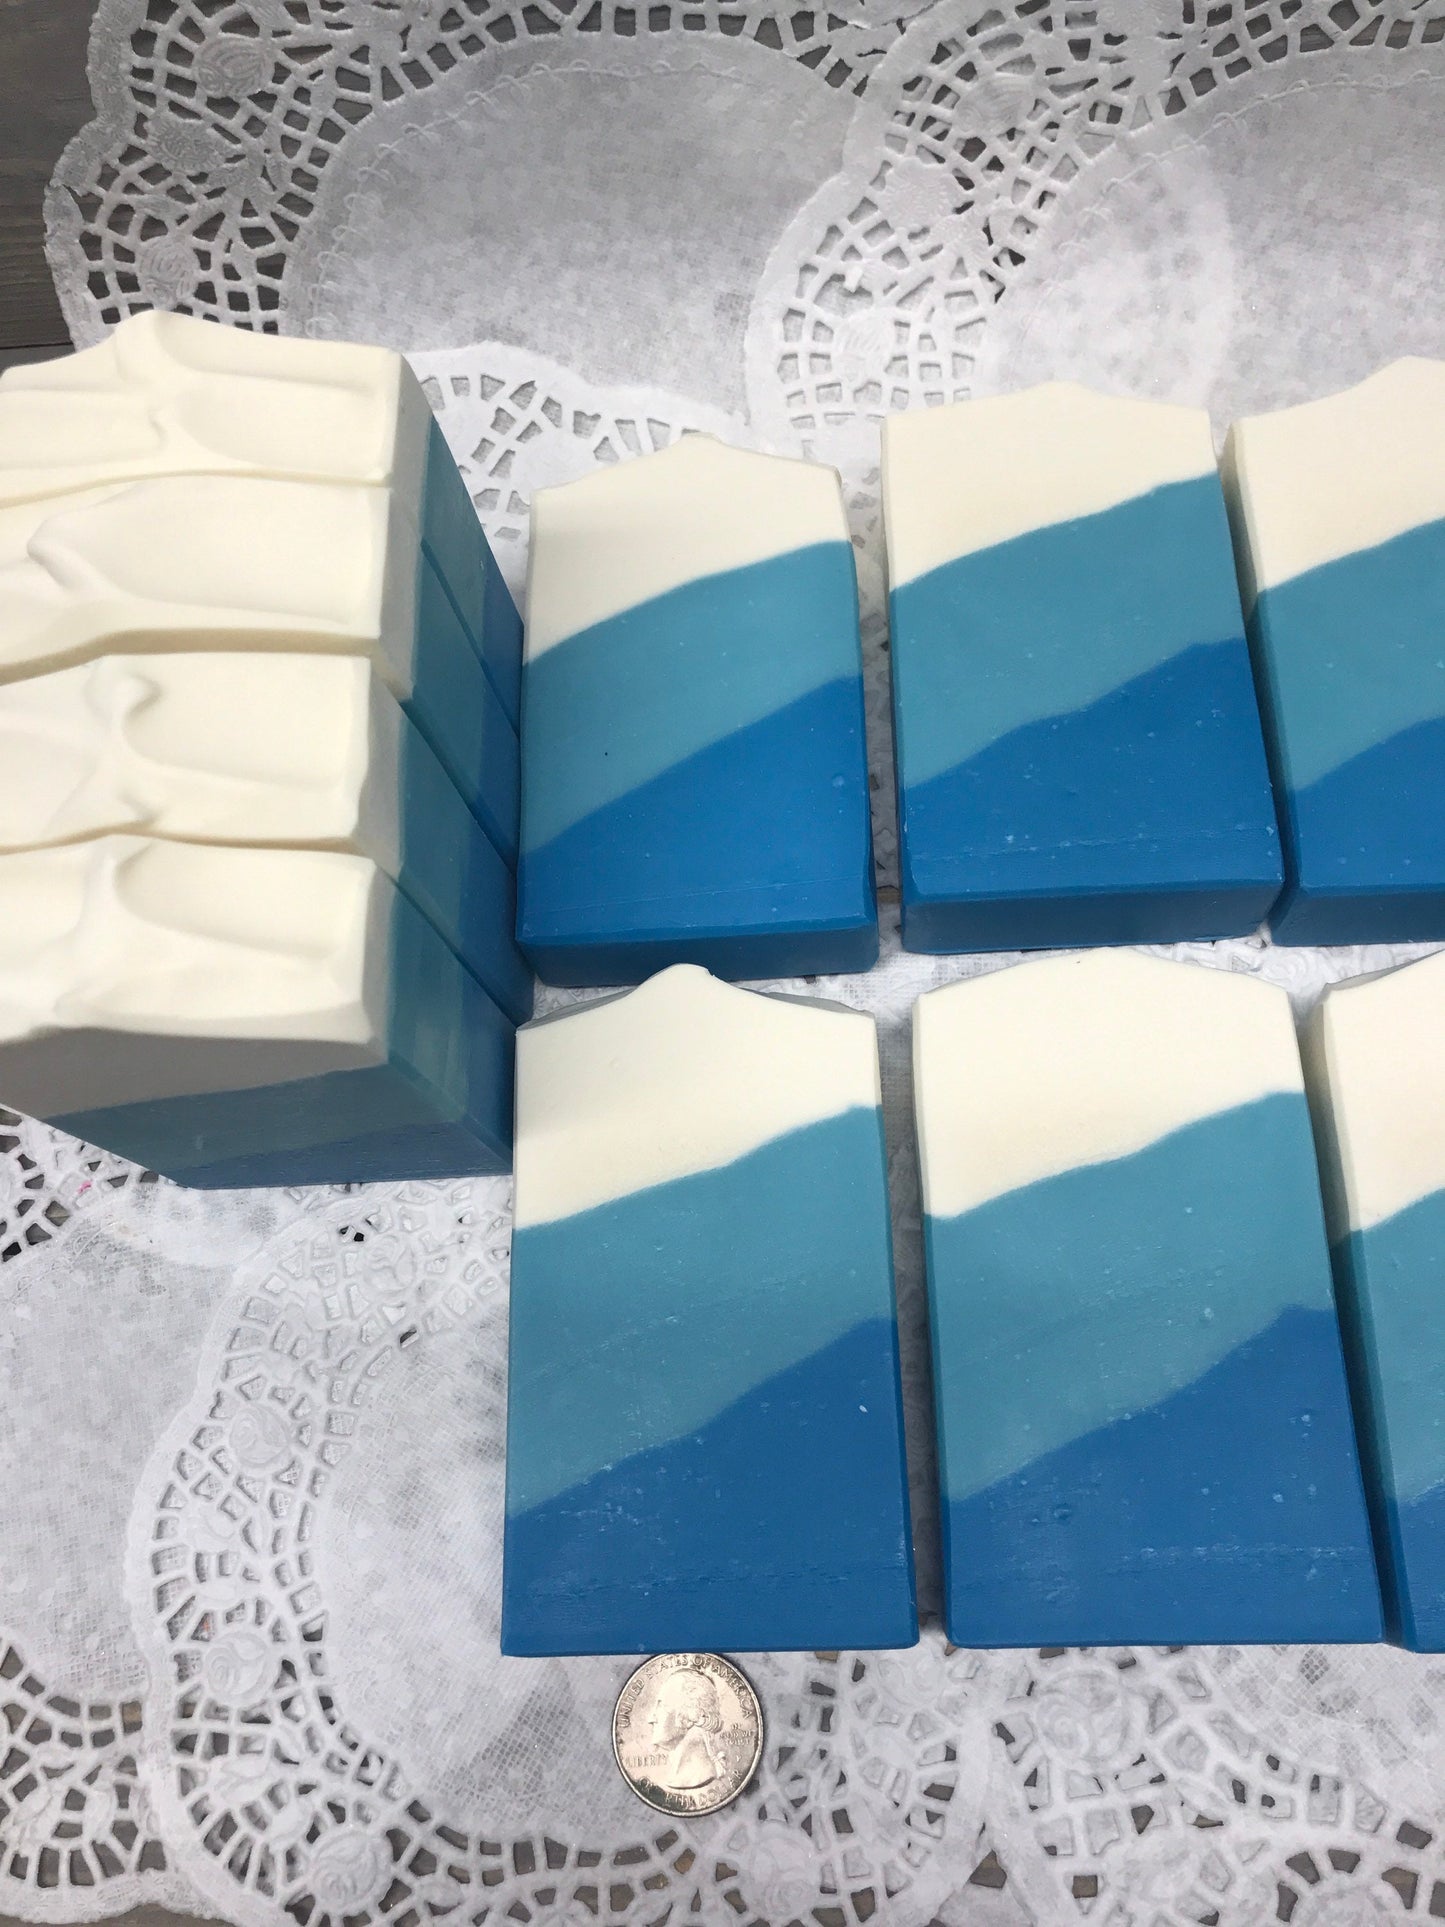 A photo of Irish Linen Soap bar soap with bands of white, light blue, and blur colors, diagonally. 